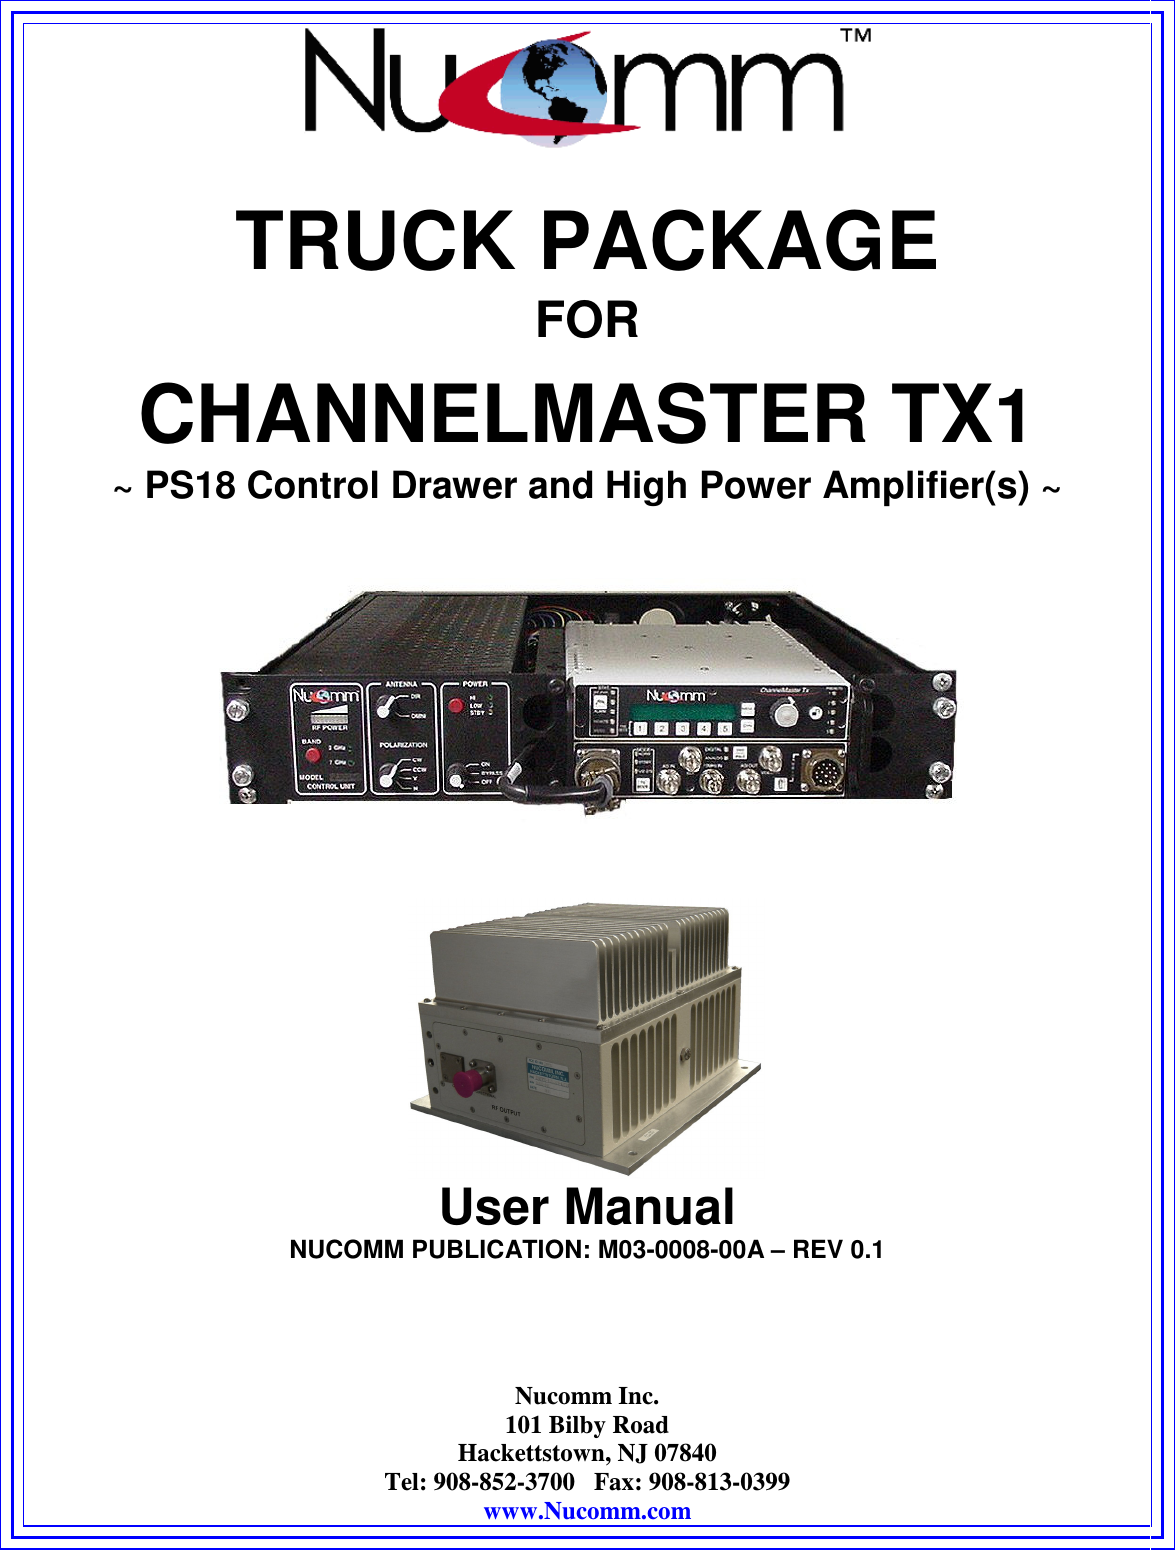   Nucomm Inc. 101 Bilby Road Hackettstown, NJ 07840 Tel: 908-852-3700   Fax: 908-813-0399 www.Nucomm.com  TRUCK PACKAGE FOR CHANNELMASTER TX1 ~ PS18 Control Drawer and High Power Amplifier(s) ~                             User Manual NUCOMM PUBLICATION: M03-0008-00A – REV 0.1    